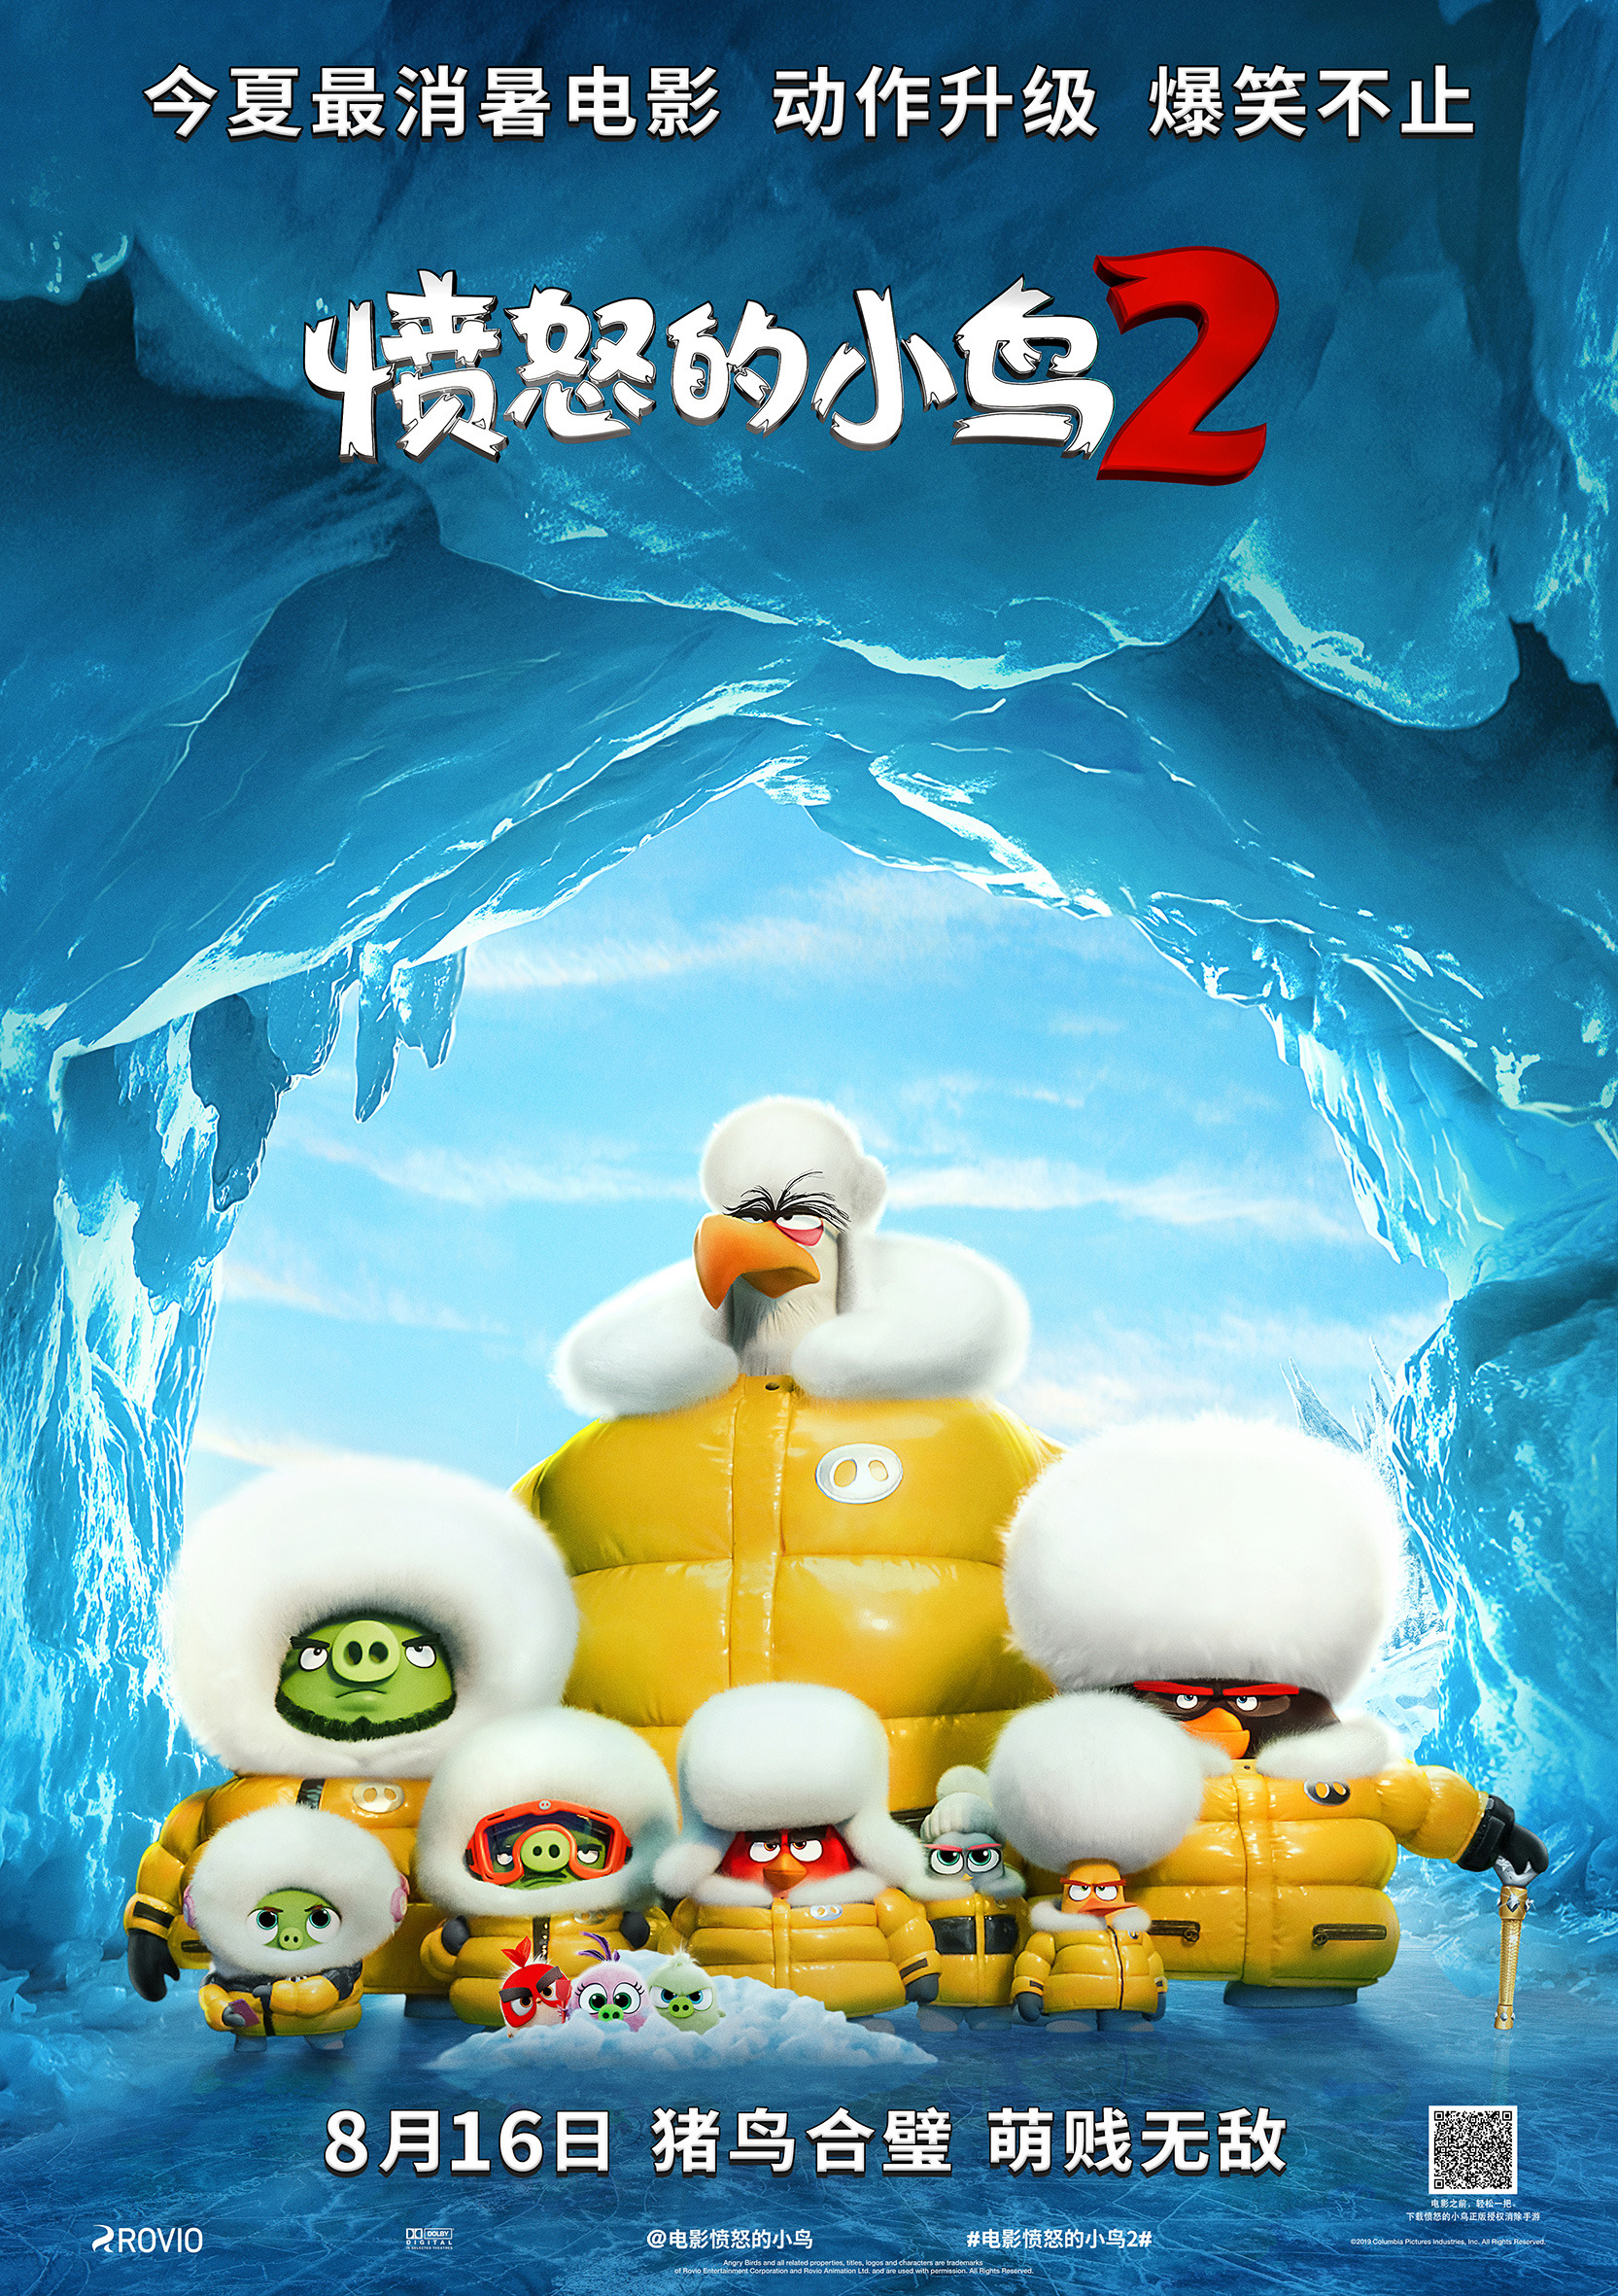 Mega Sized Movie Poster Image for The Angry Birds Movie 2 (#13 of 18)